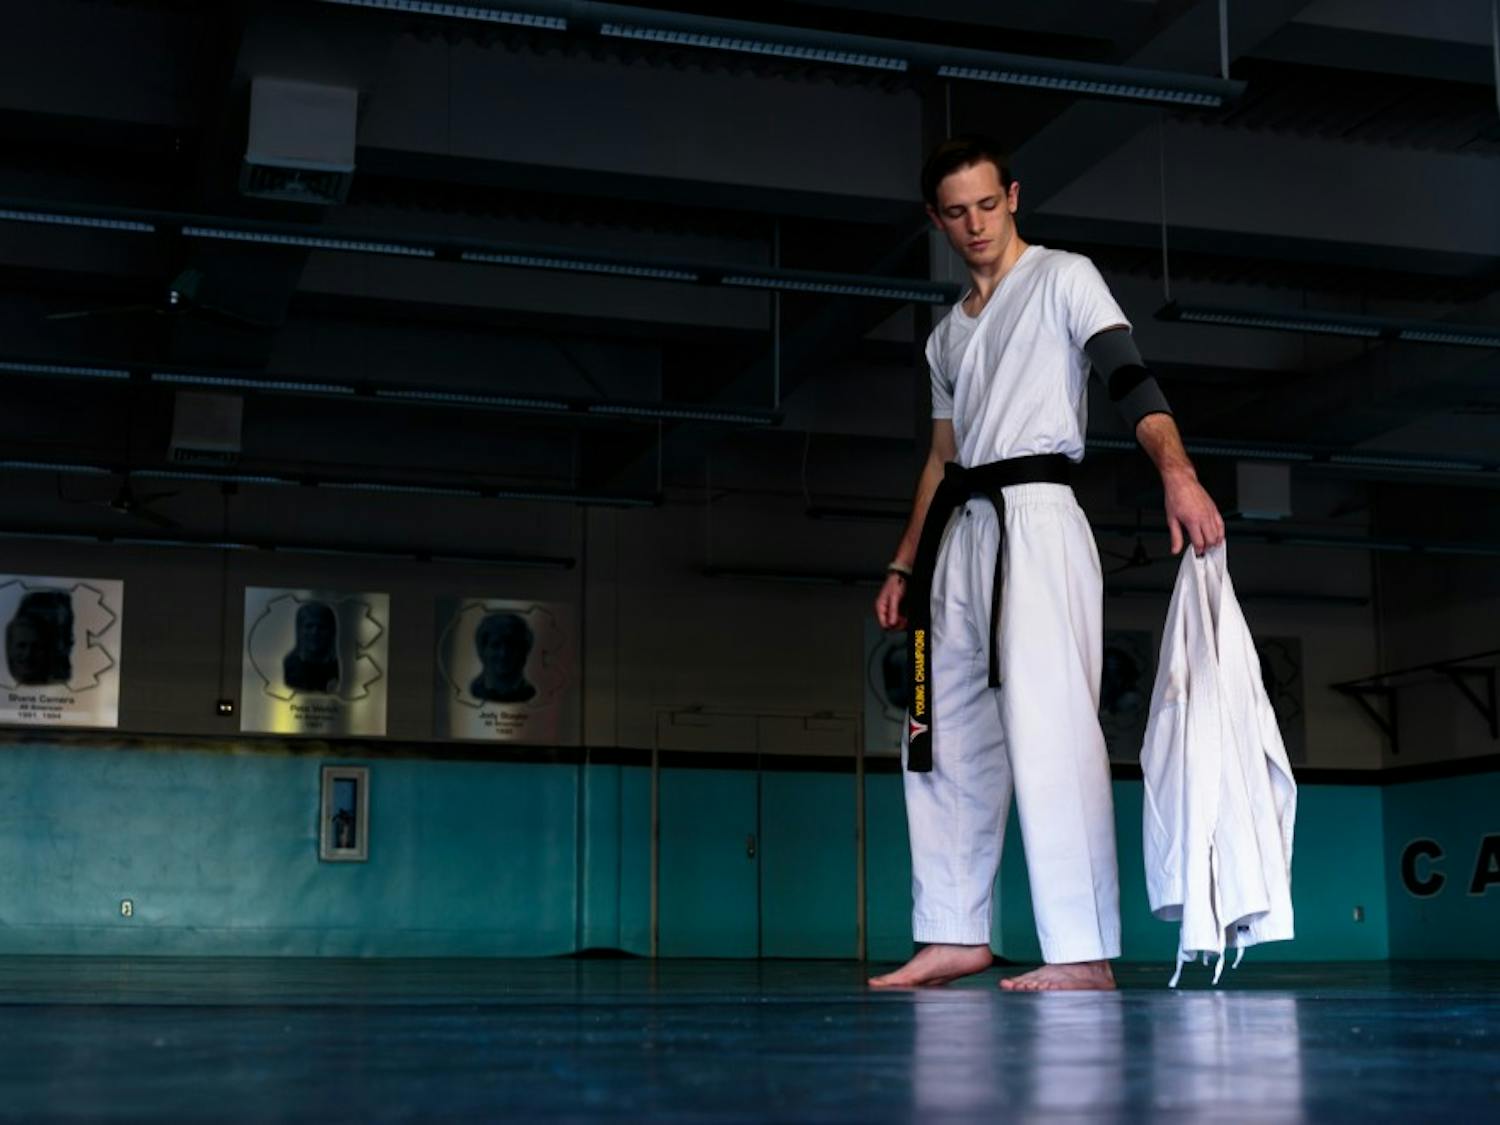 Senoir psychology and peace, war, and defense major Brandon Kelly grew averted to martial arts after his injured elbow cost him his judo match at the olympic trials. His experience studying abroad helped him find catharsis.